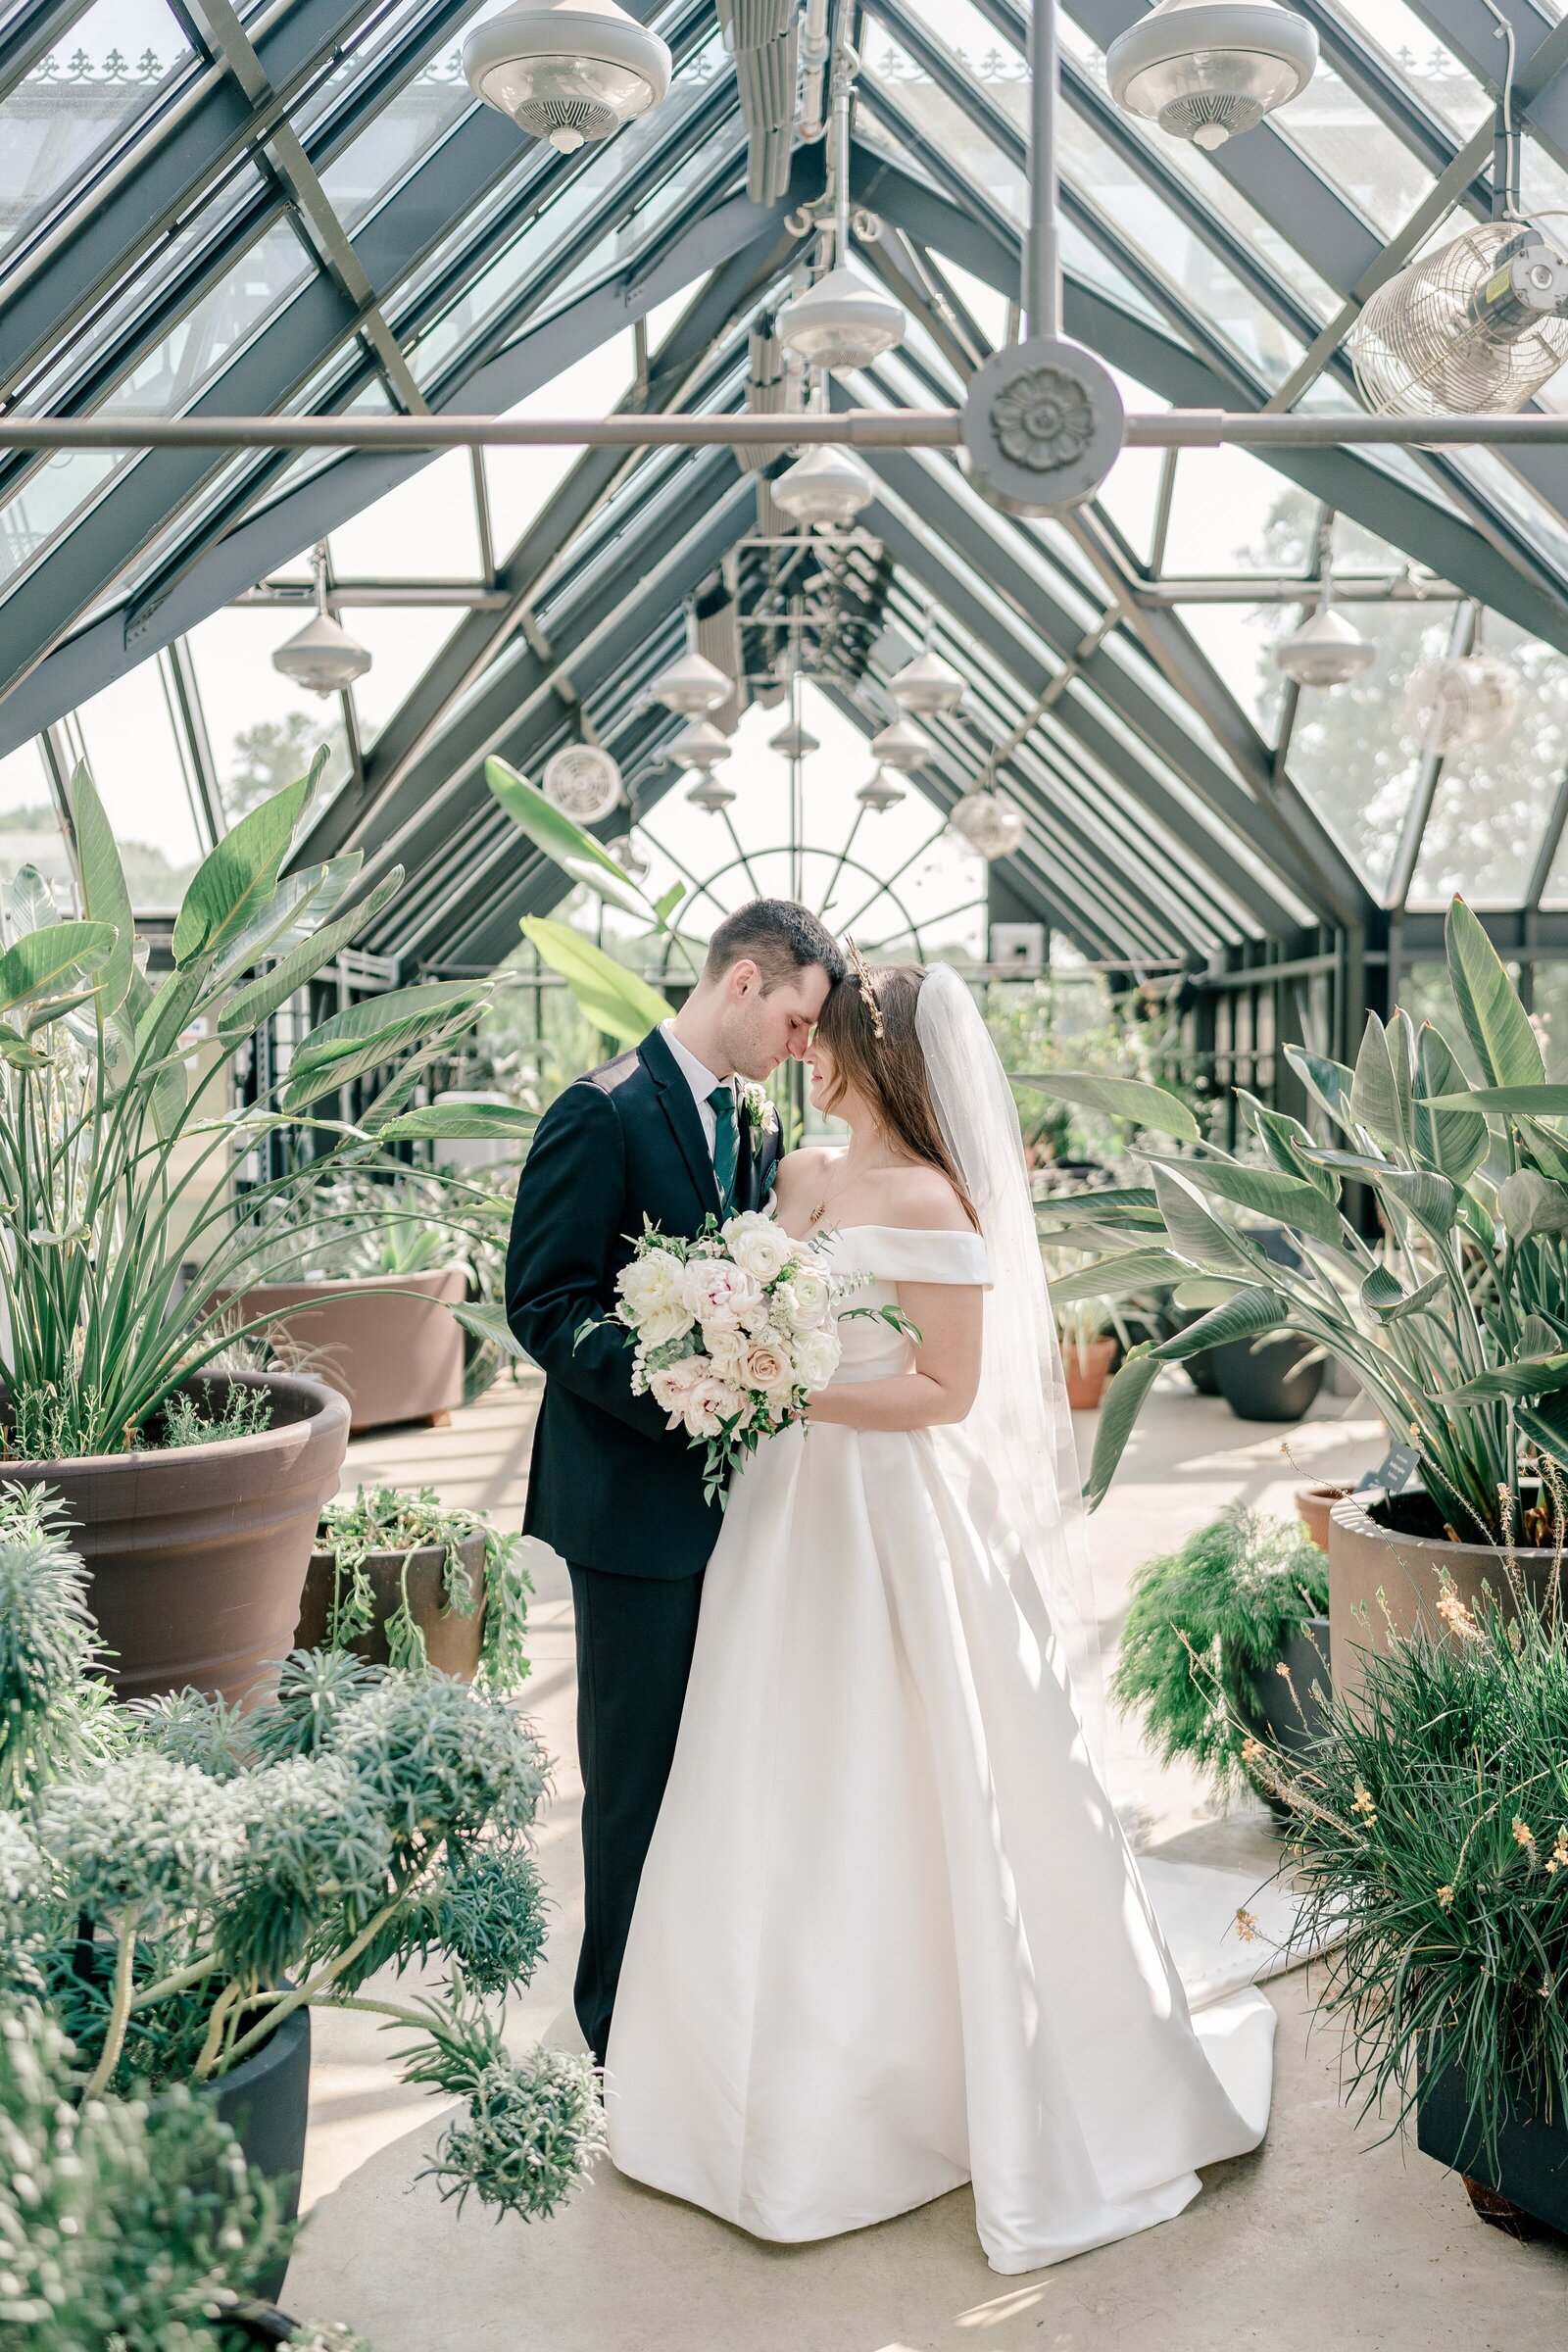 A bride and groom pose for a classic portrait inside the greenhouse during their wedding at Meadowlark Botanical Gardens in Northern Virginia